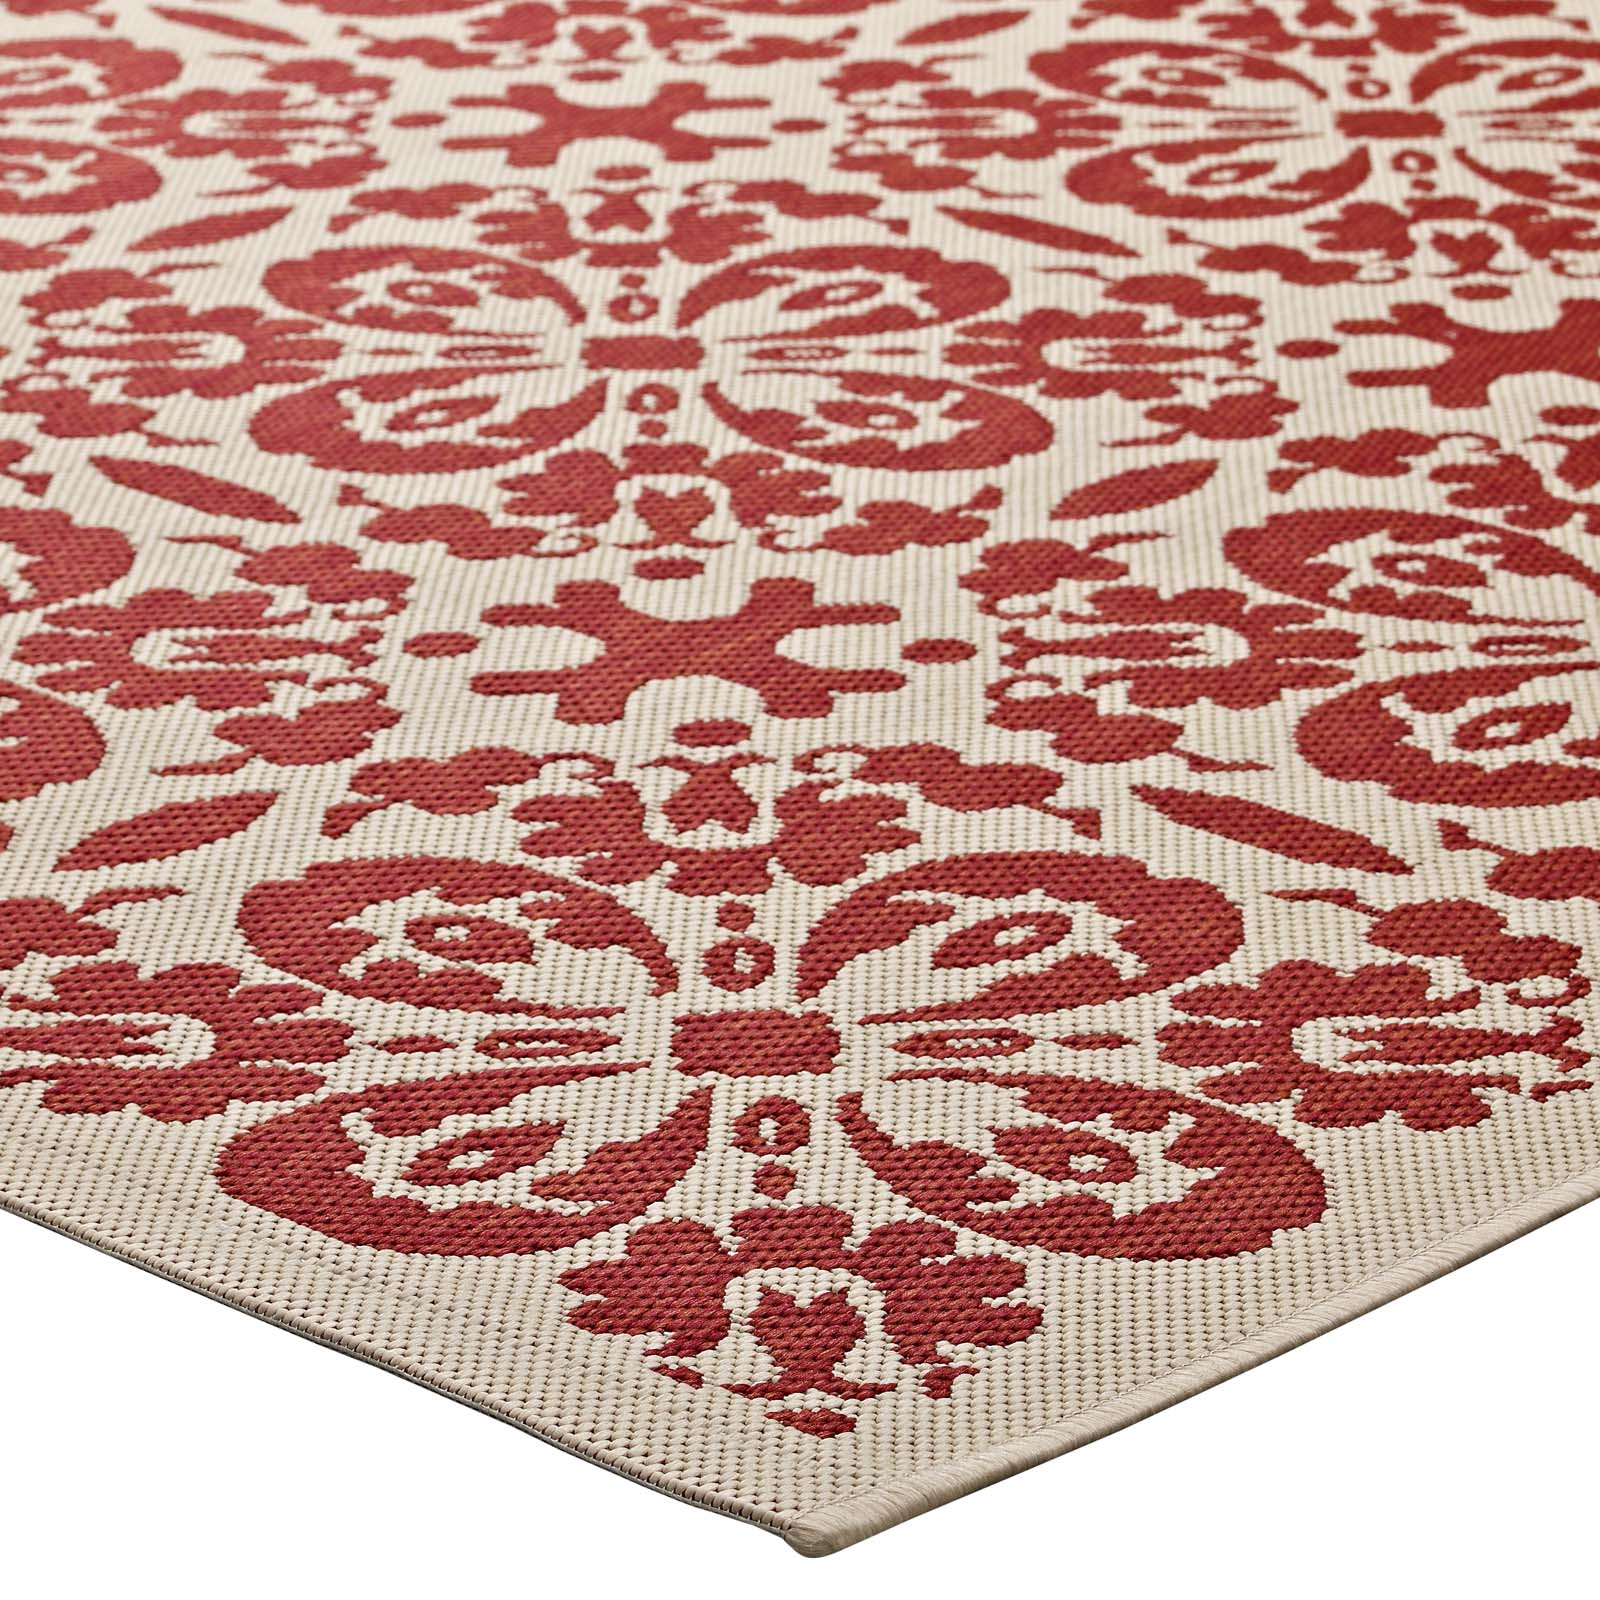 Modway Outdoor Rugs - Ariana Vintage Floral Trellis 9'x12' Outdoor Area Rug Red & Beige